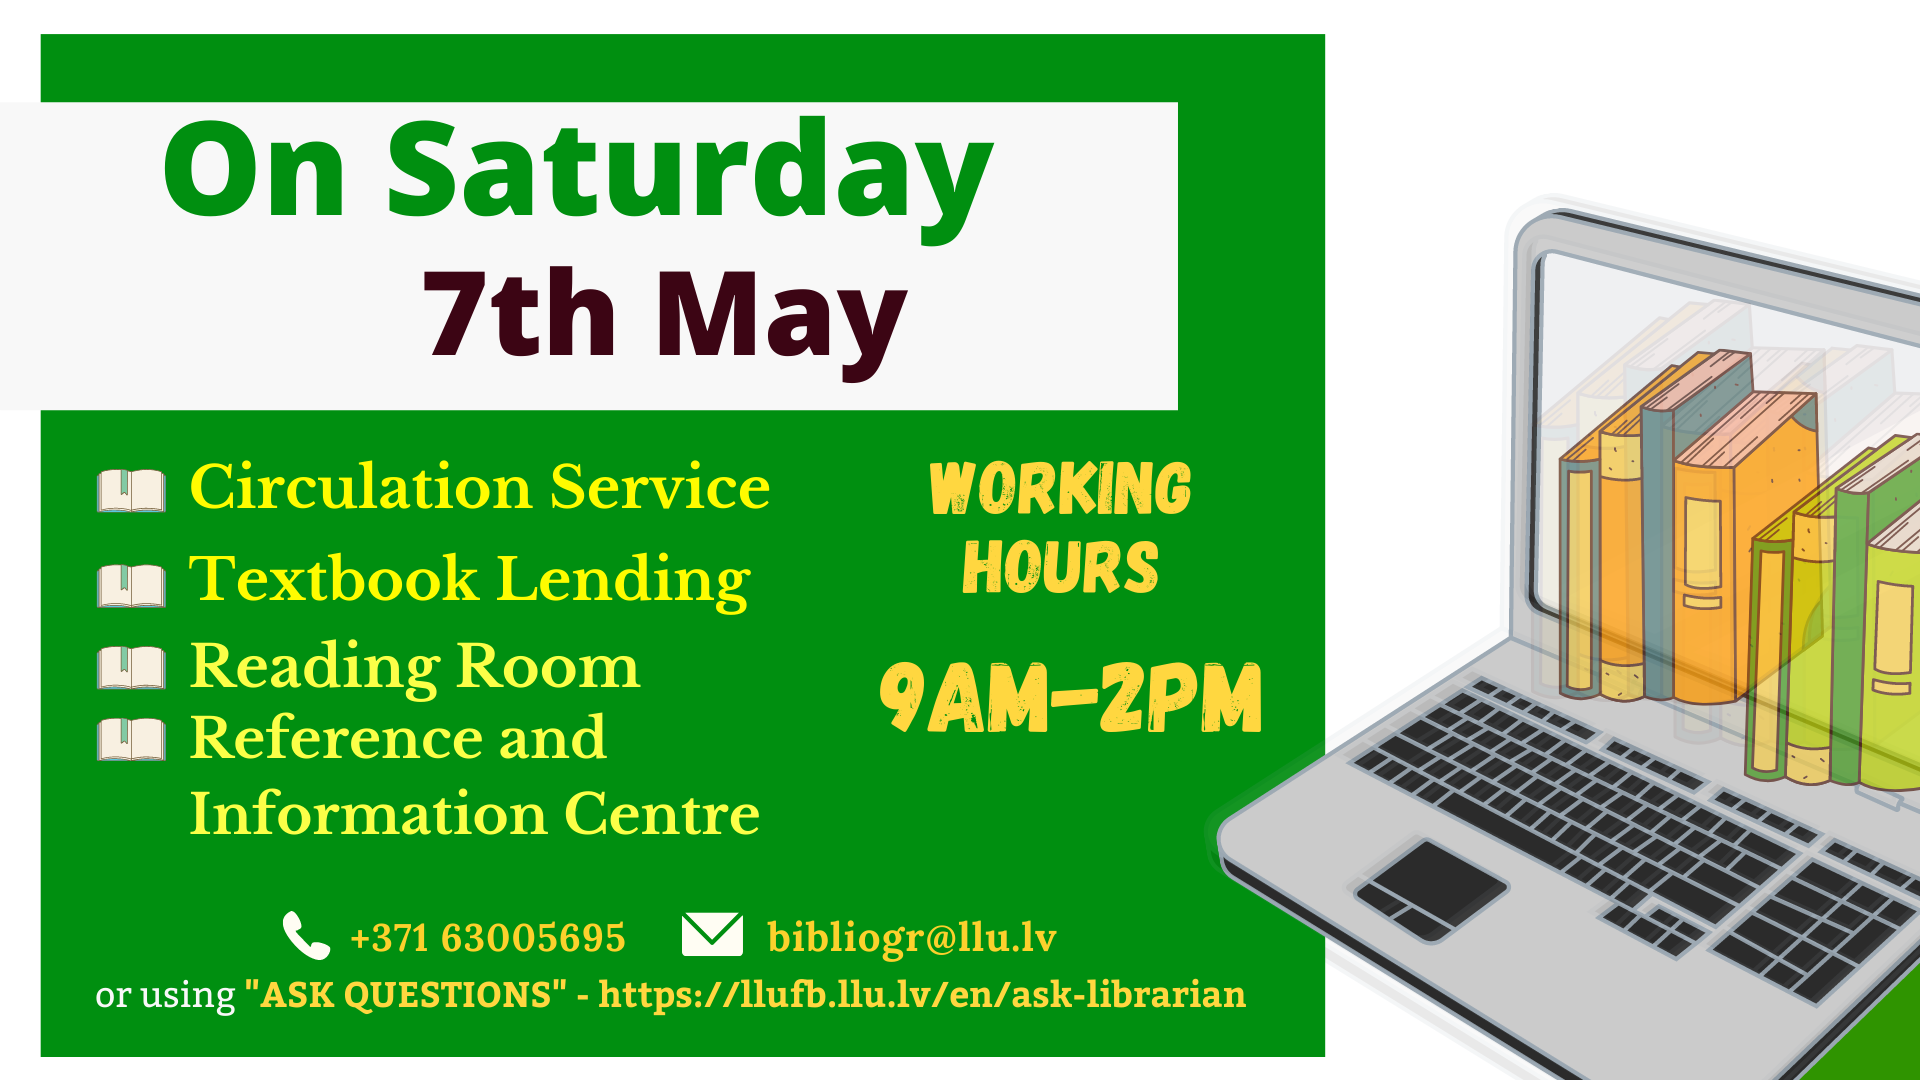 Library of the Latvia University of Life Sciences and Technologies on Saturday 7 May working hours 9am-2pm